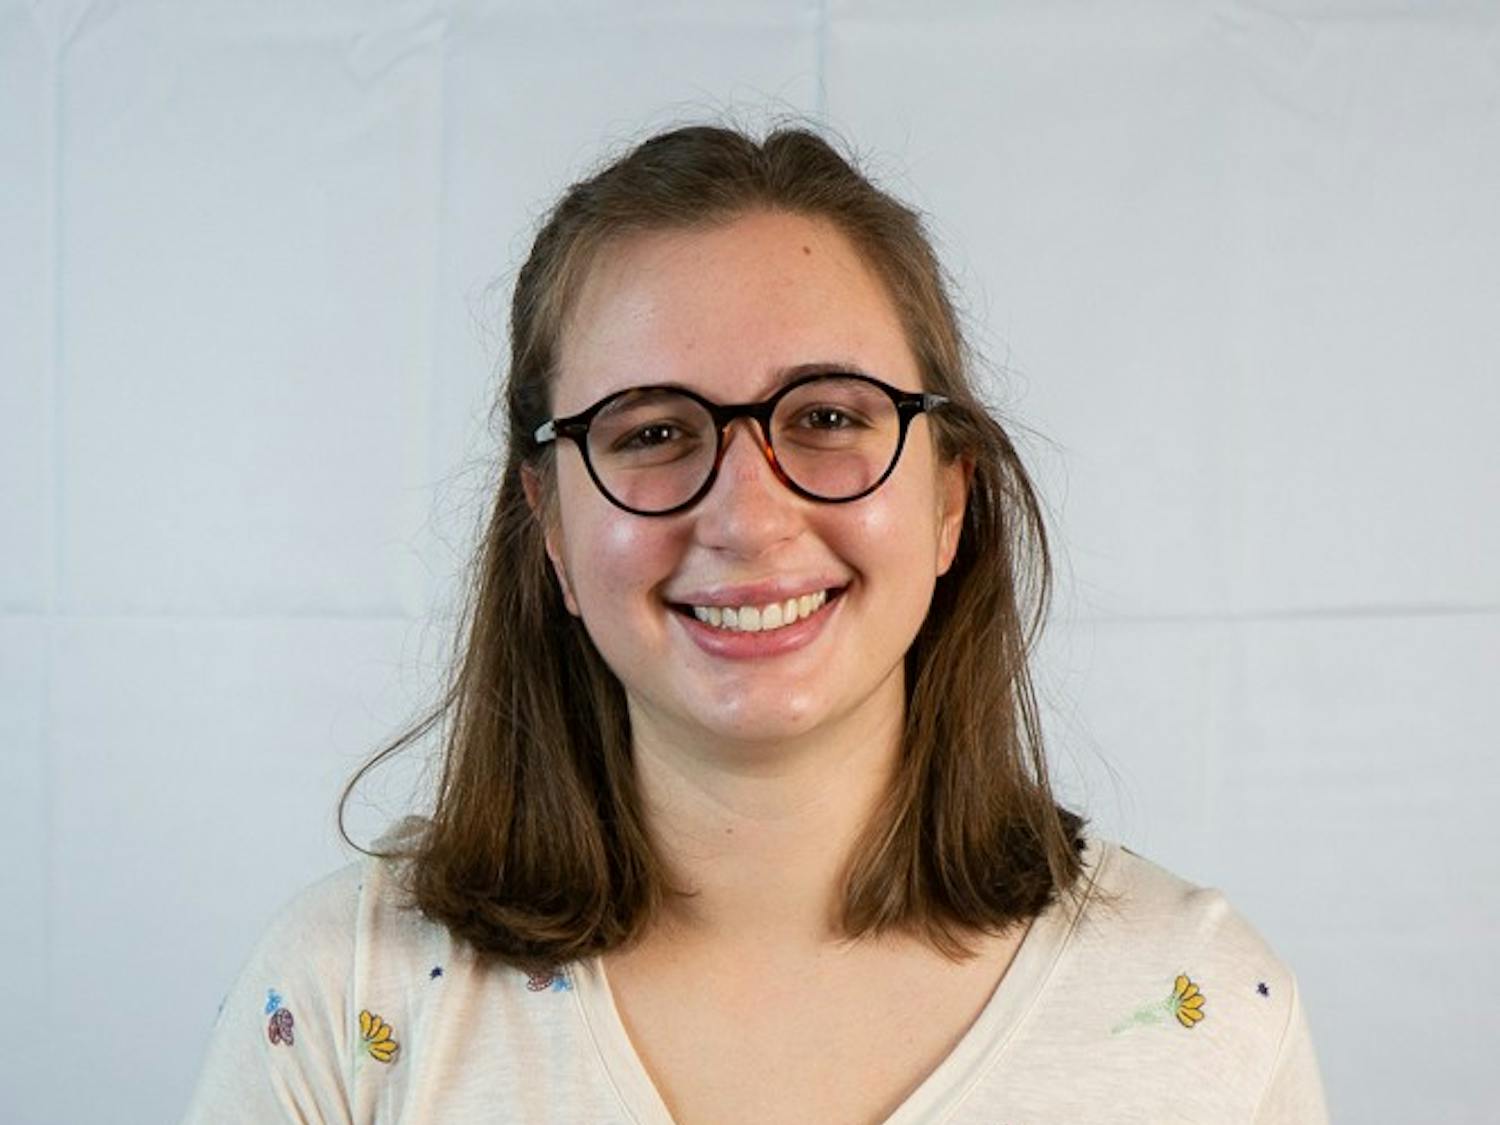 2020-2021 Editor-in-Chief Anna Pogarcic